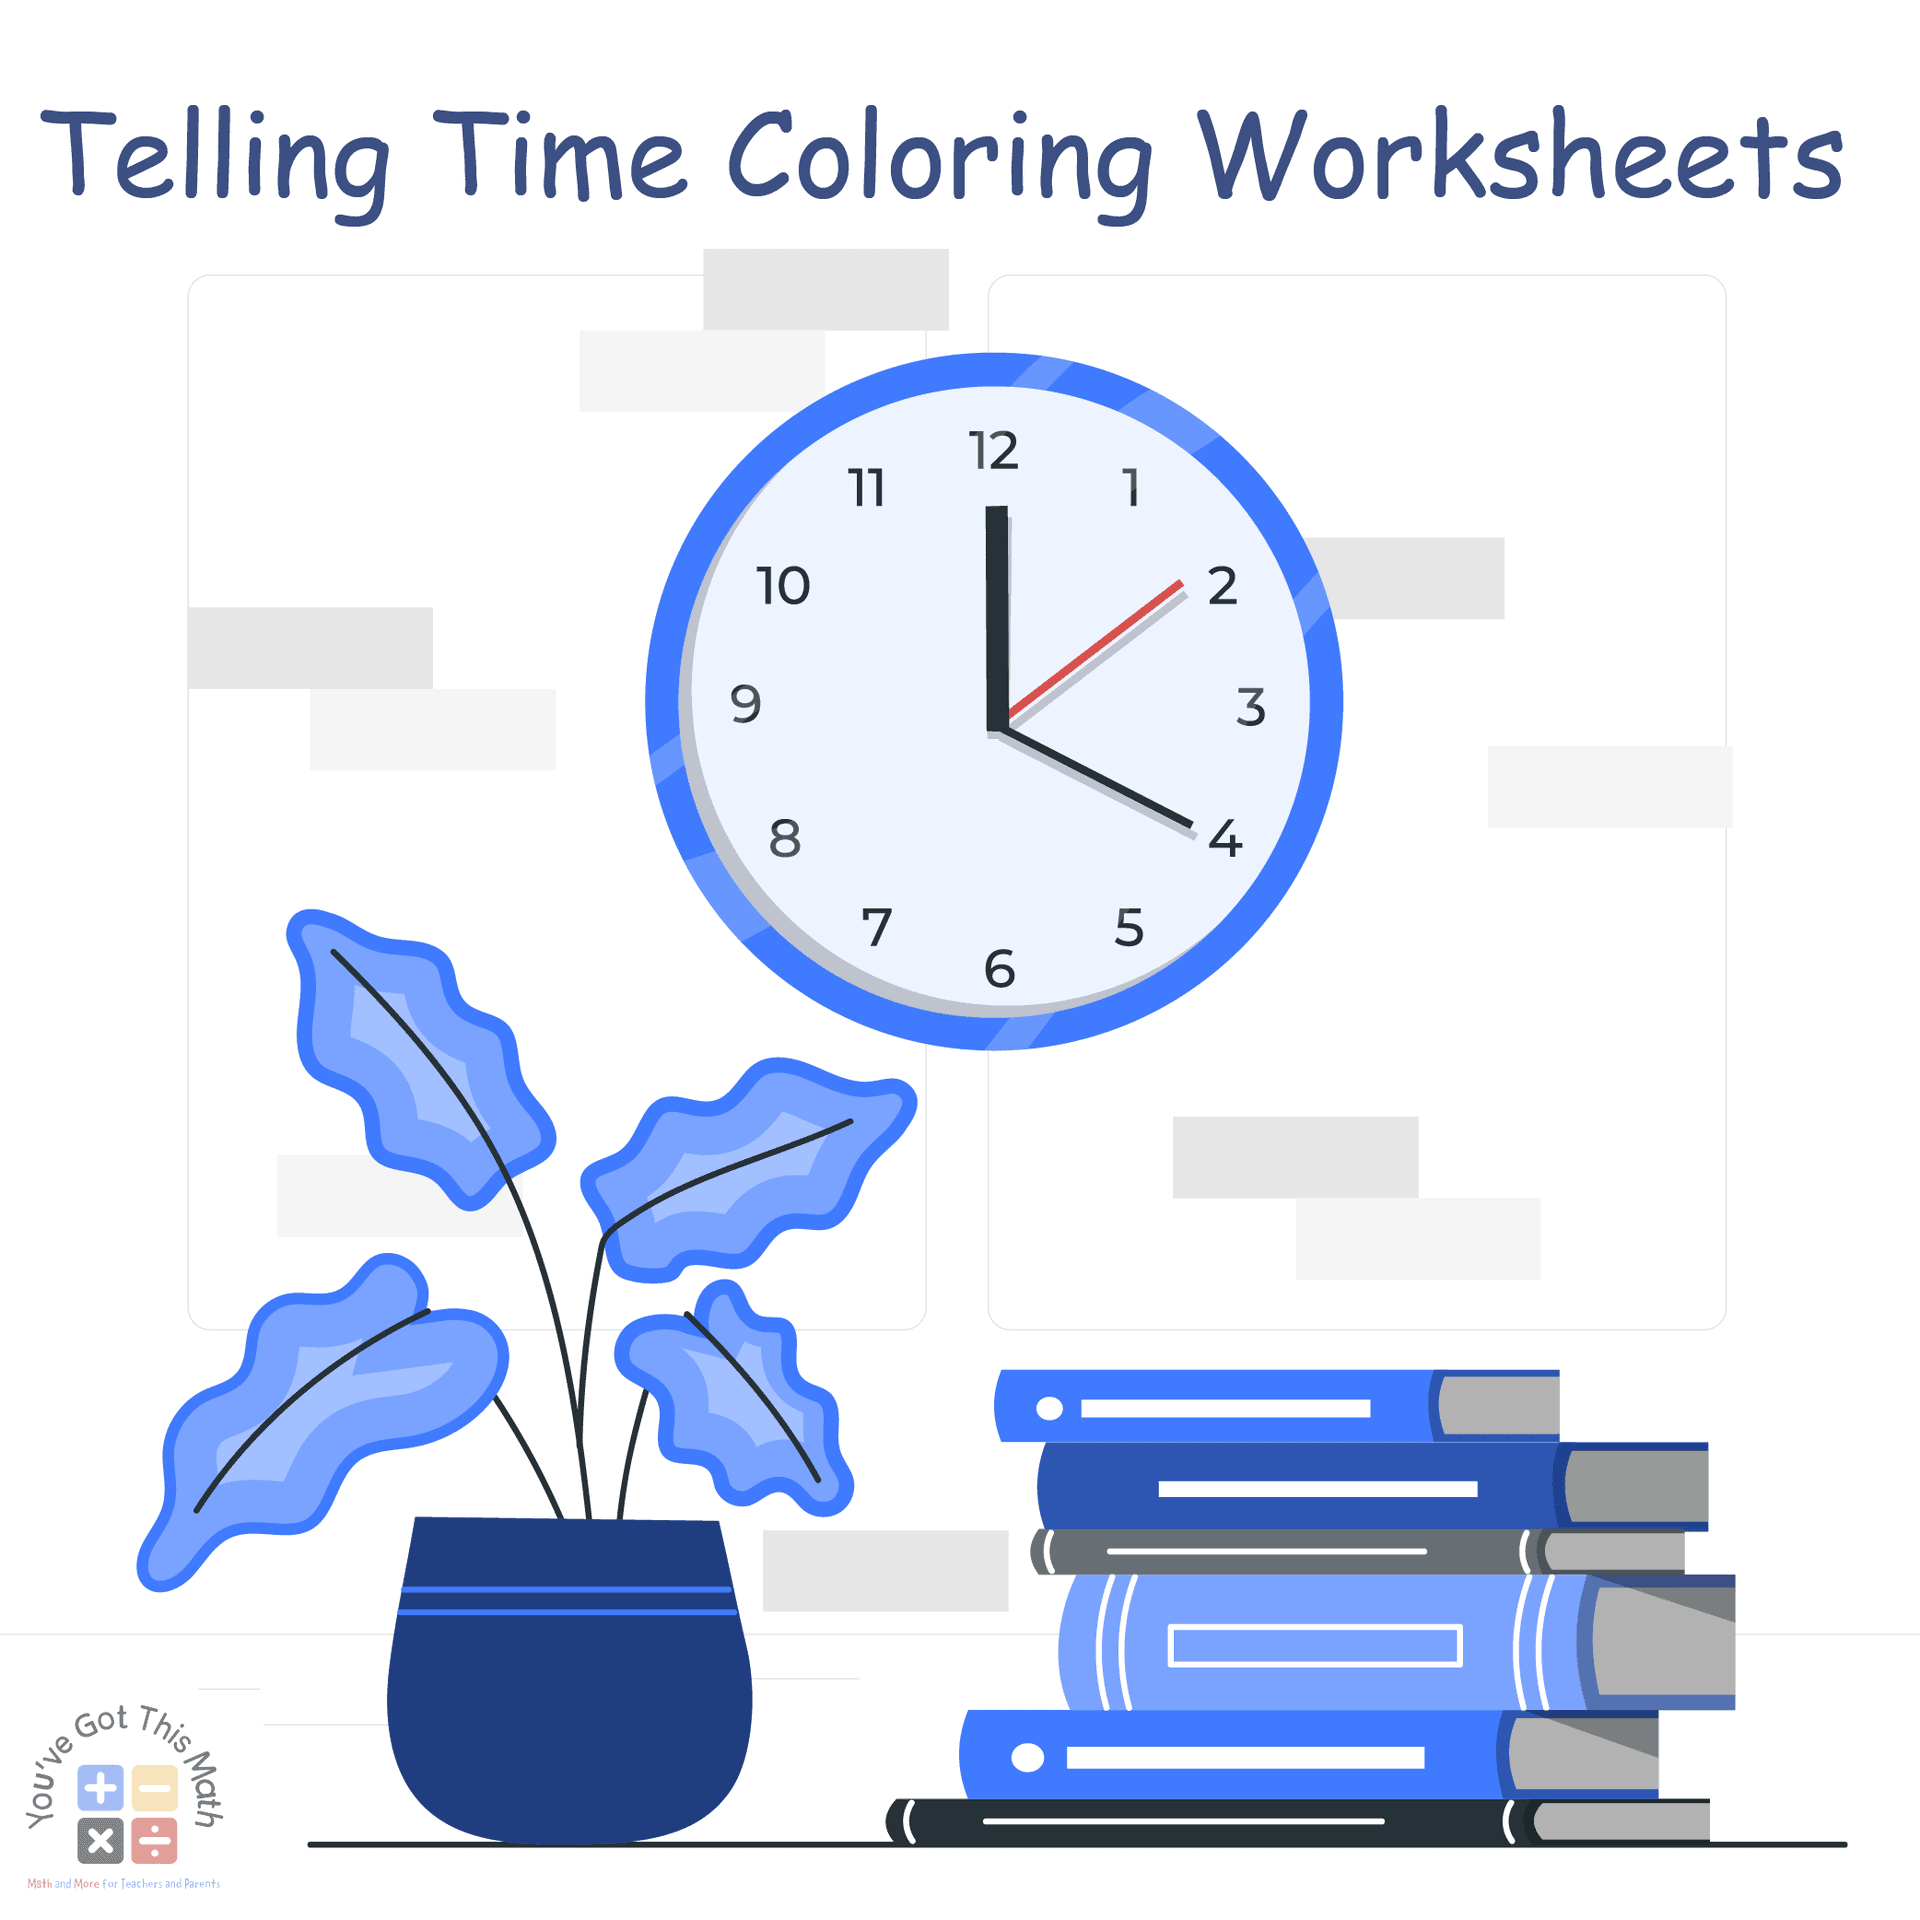 5 Free Telling Time Coloring Worksheets